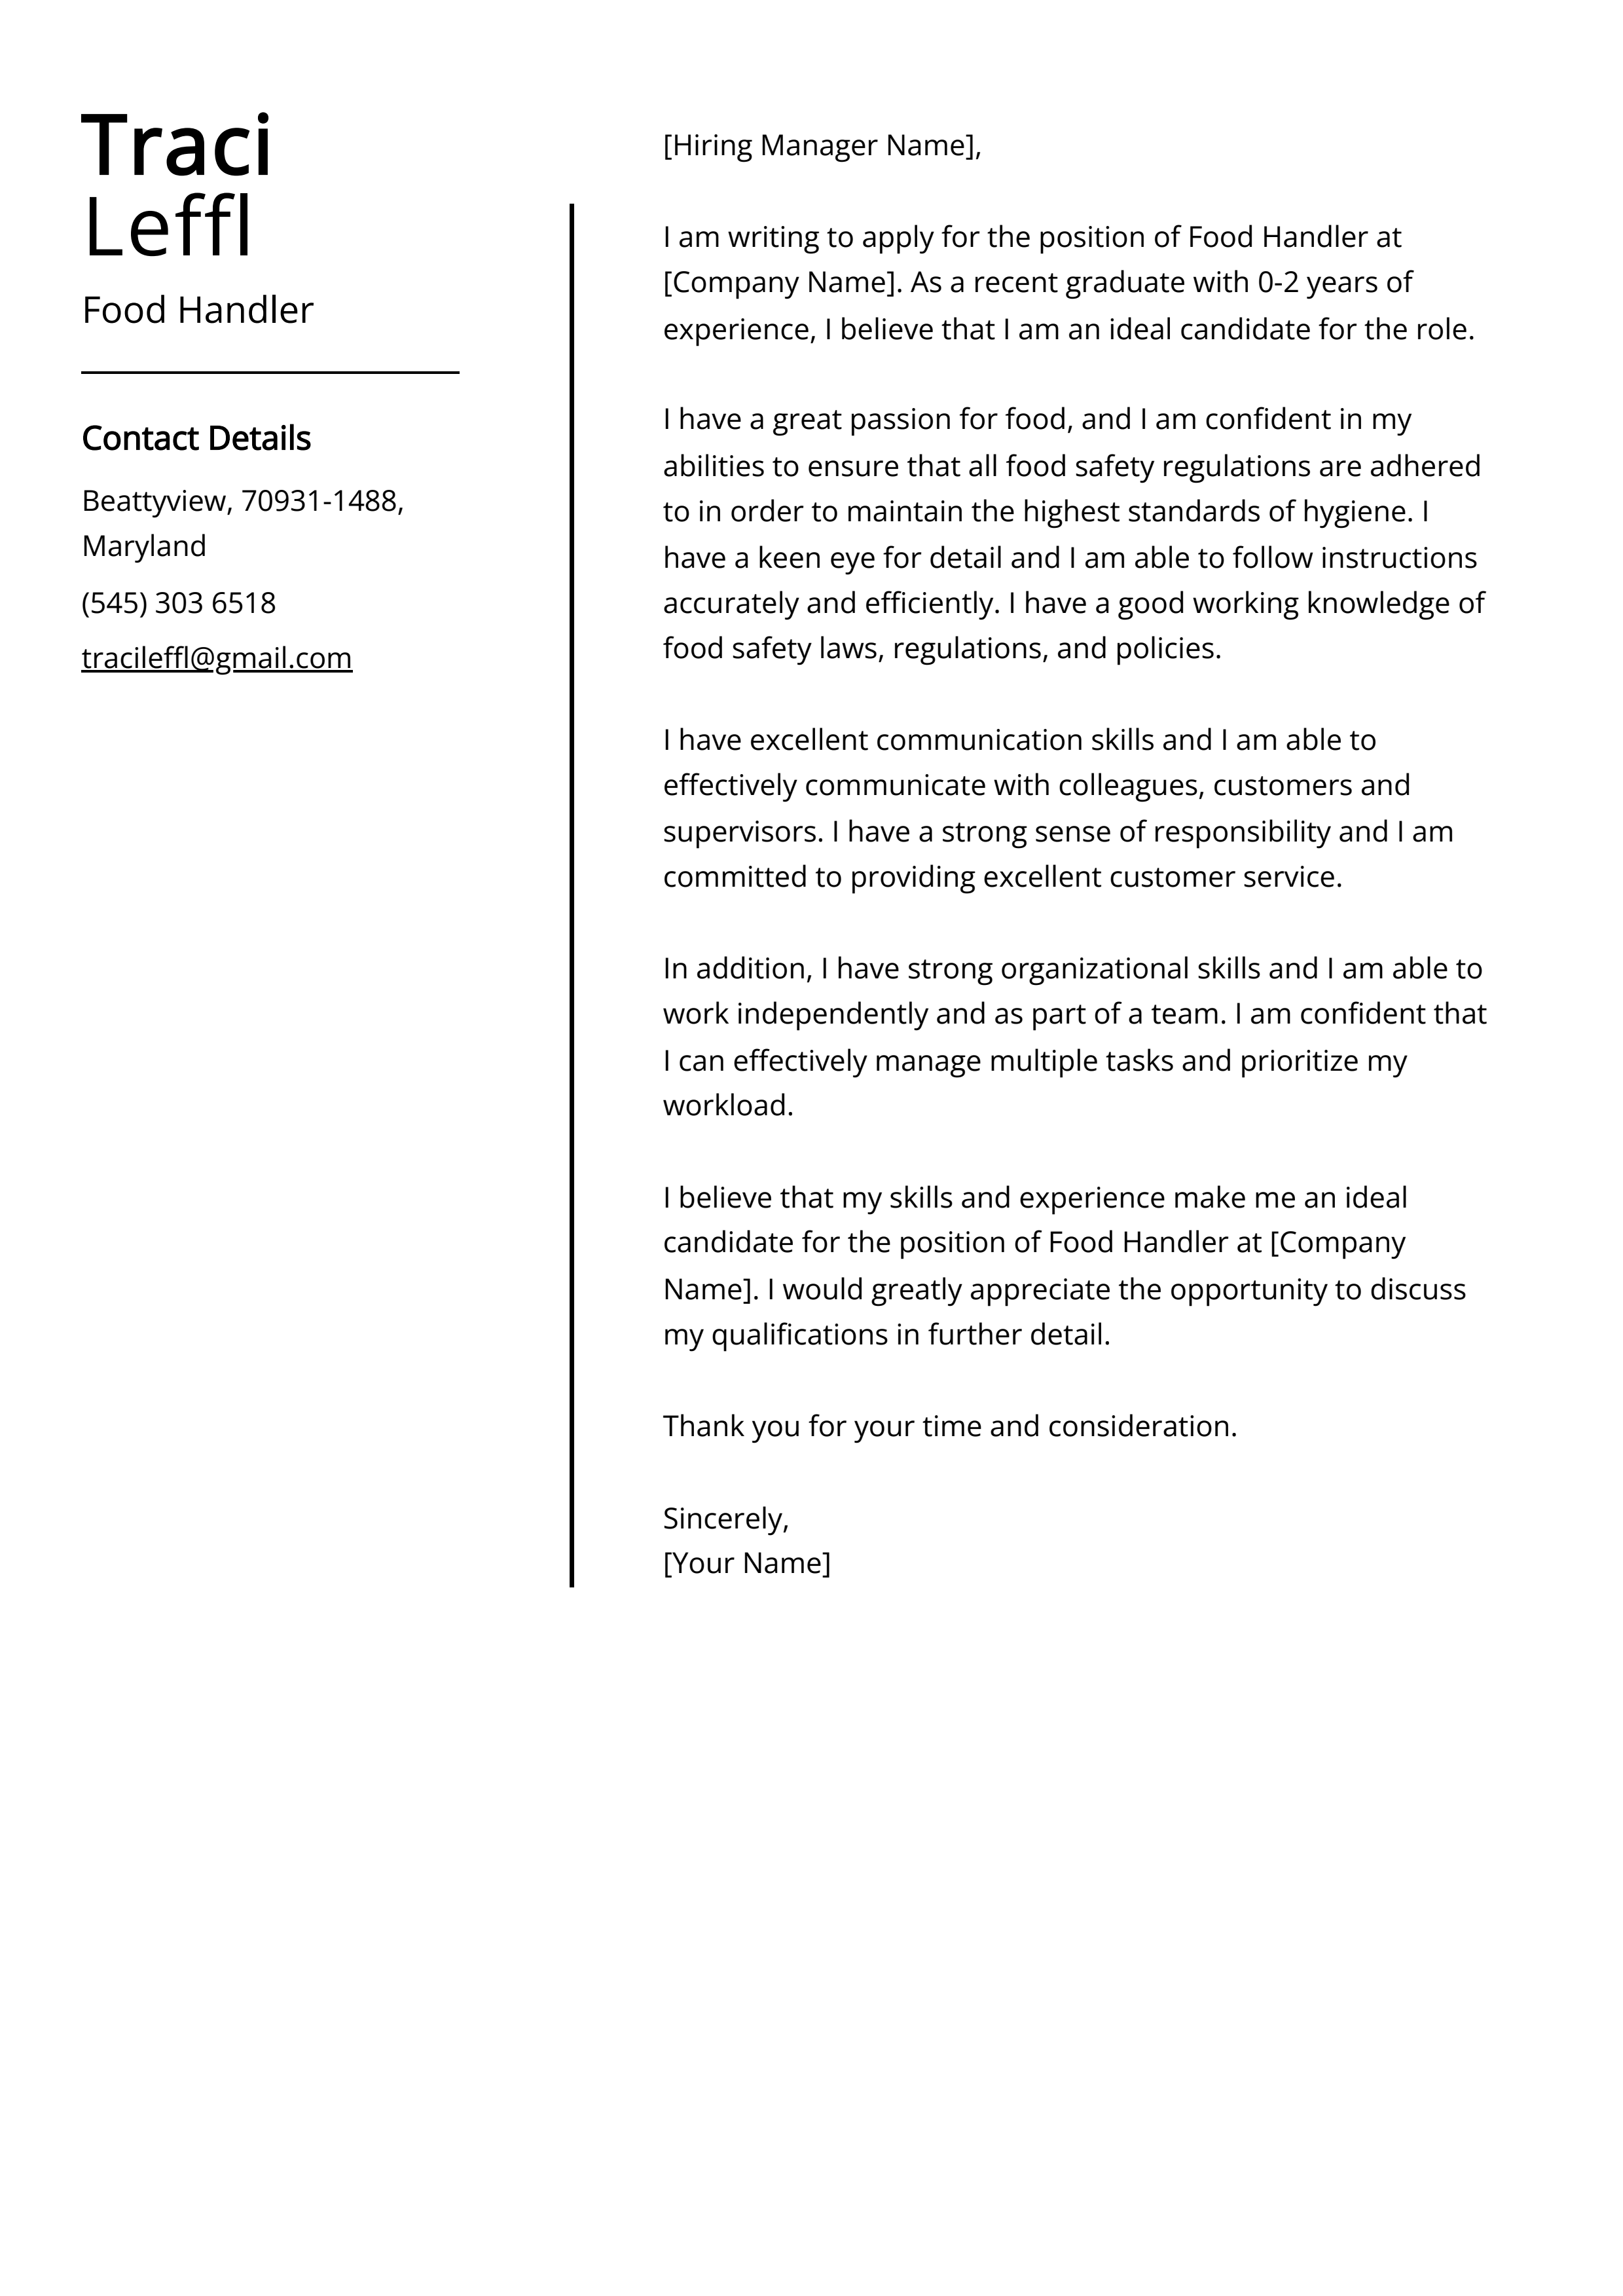 Food Handler Cover Letter Example